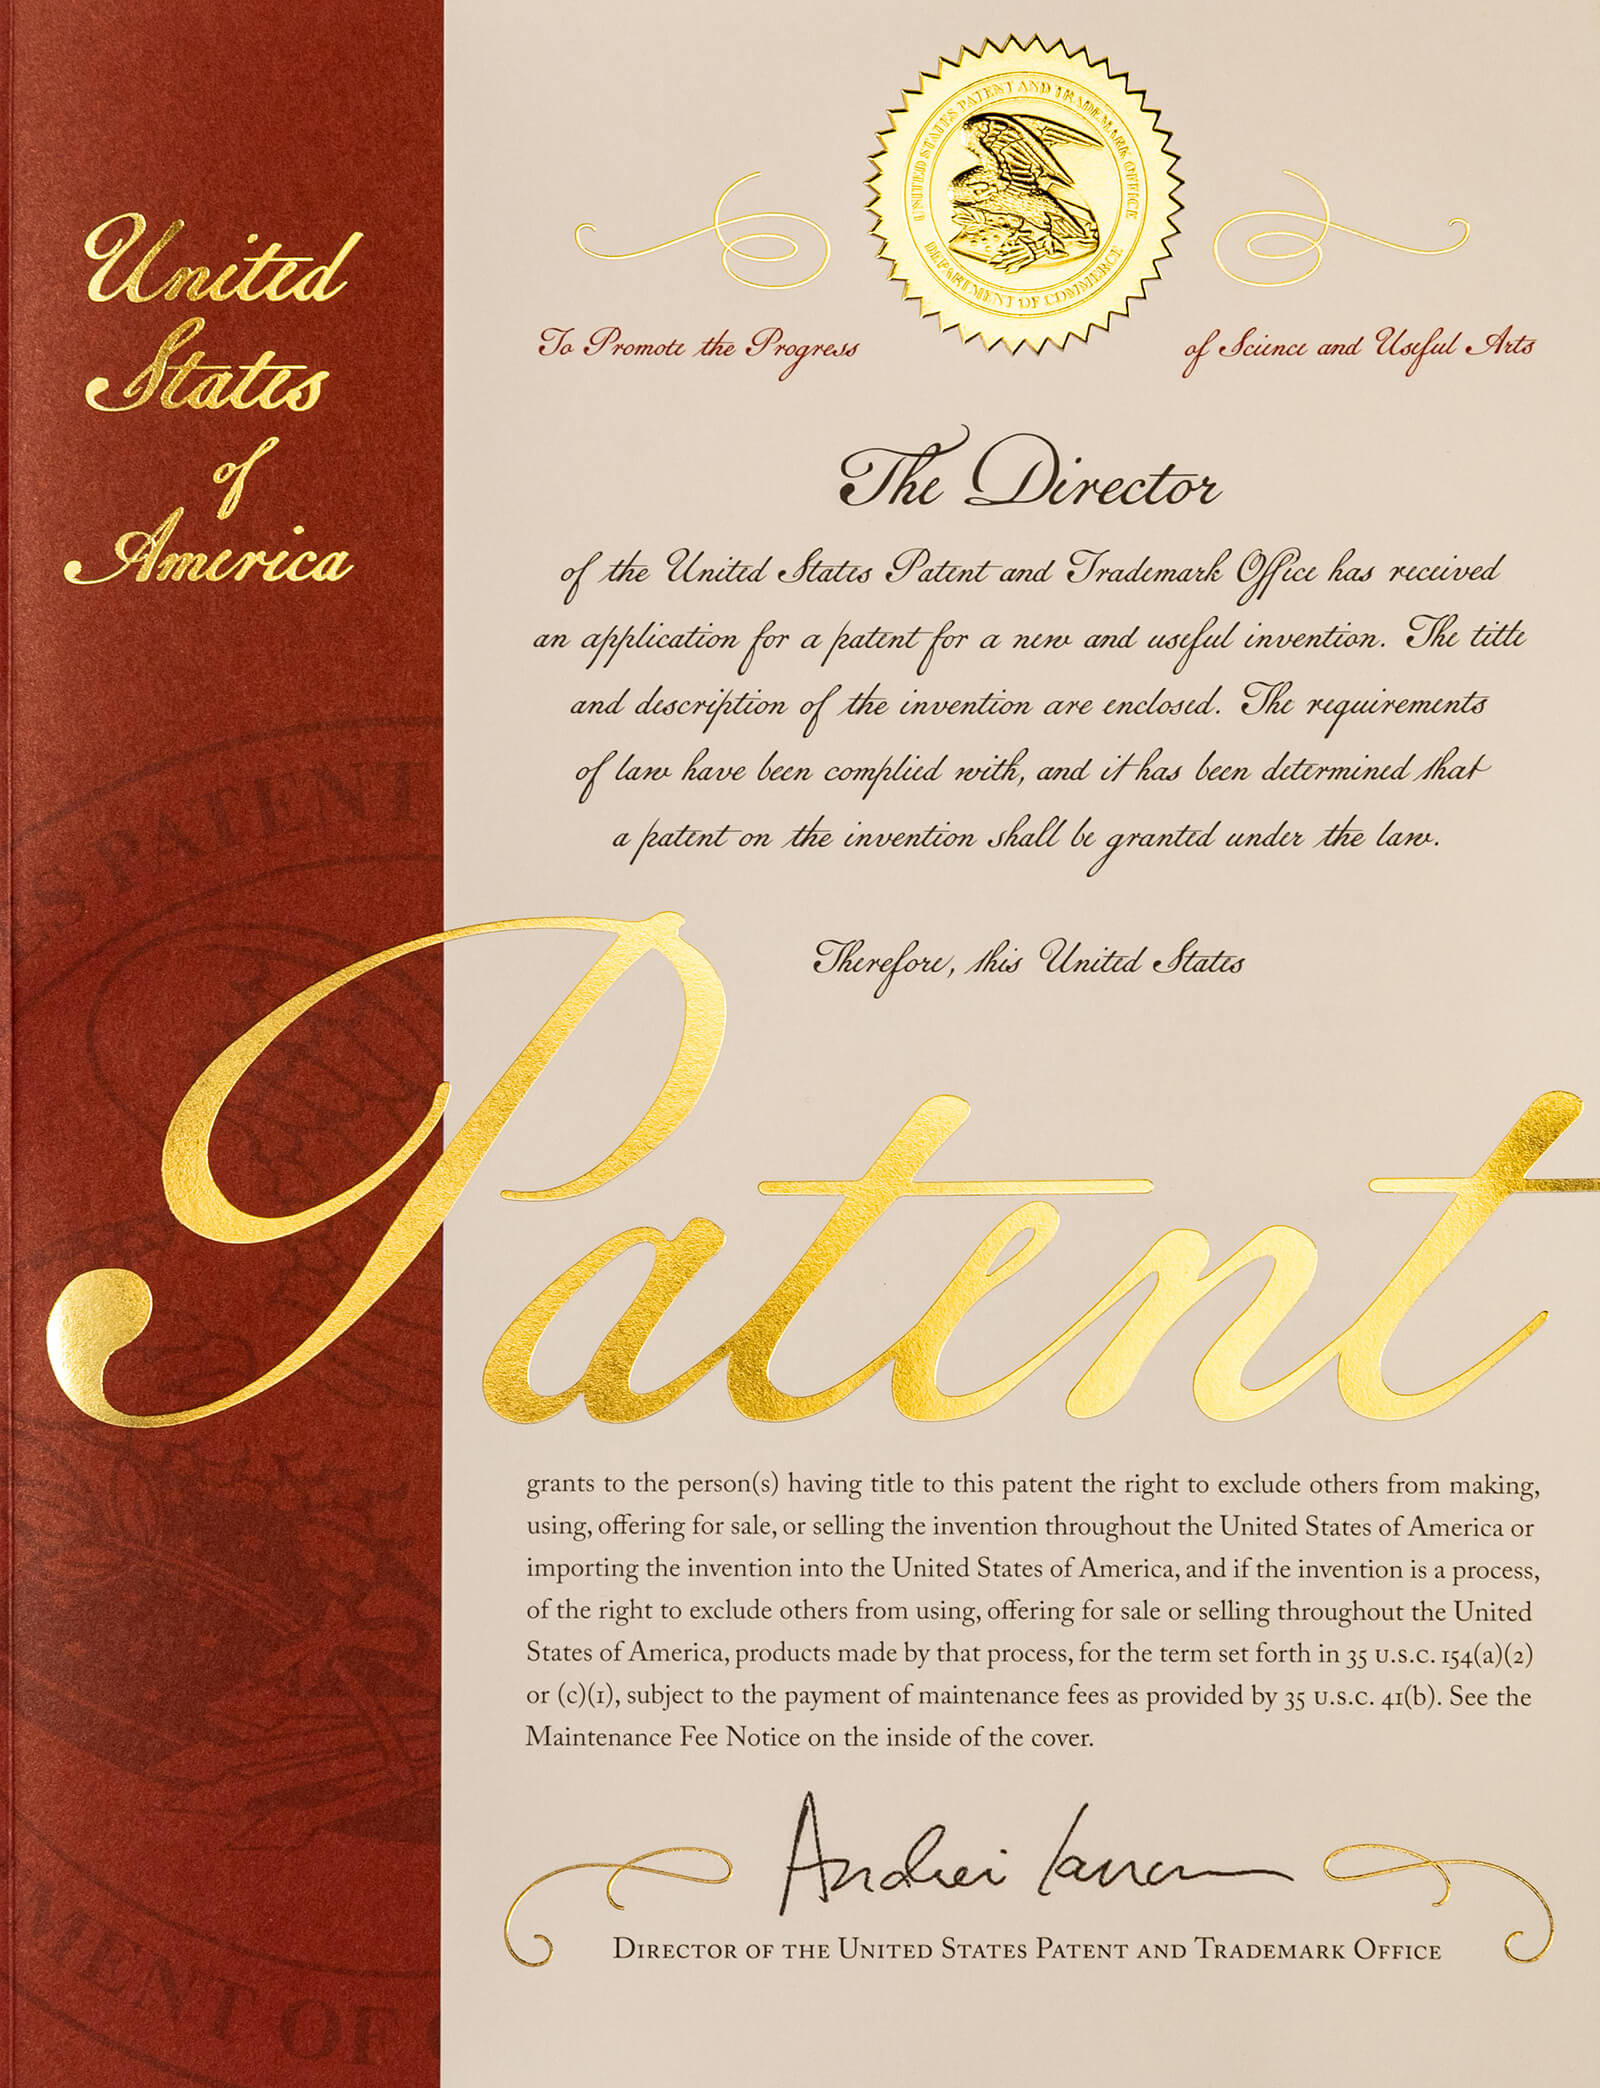 The new U.S. patent cover featuring a gold USPTO seal at top, a red strip along the right side, and a large gold embossed ‘Patent’ as the focal point. The design uses script typeface throughout and also features statutory language and the signature of the current USPTO director, Andrei Iancu. 